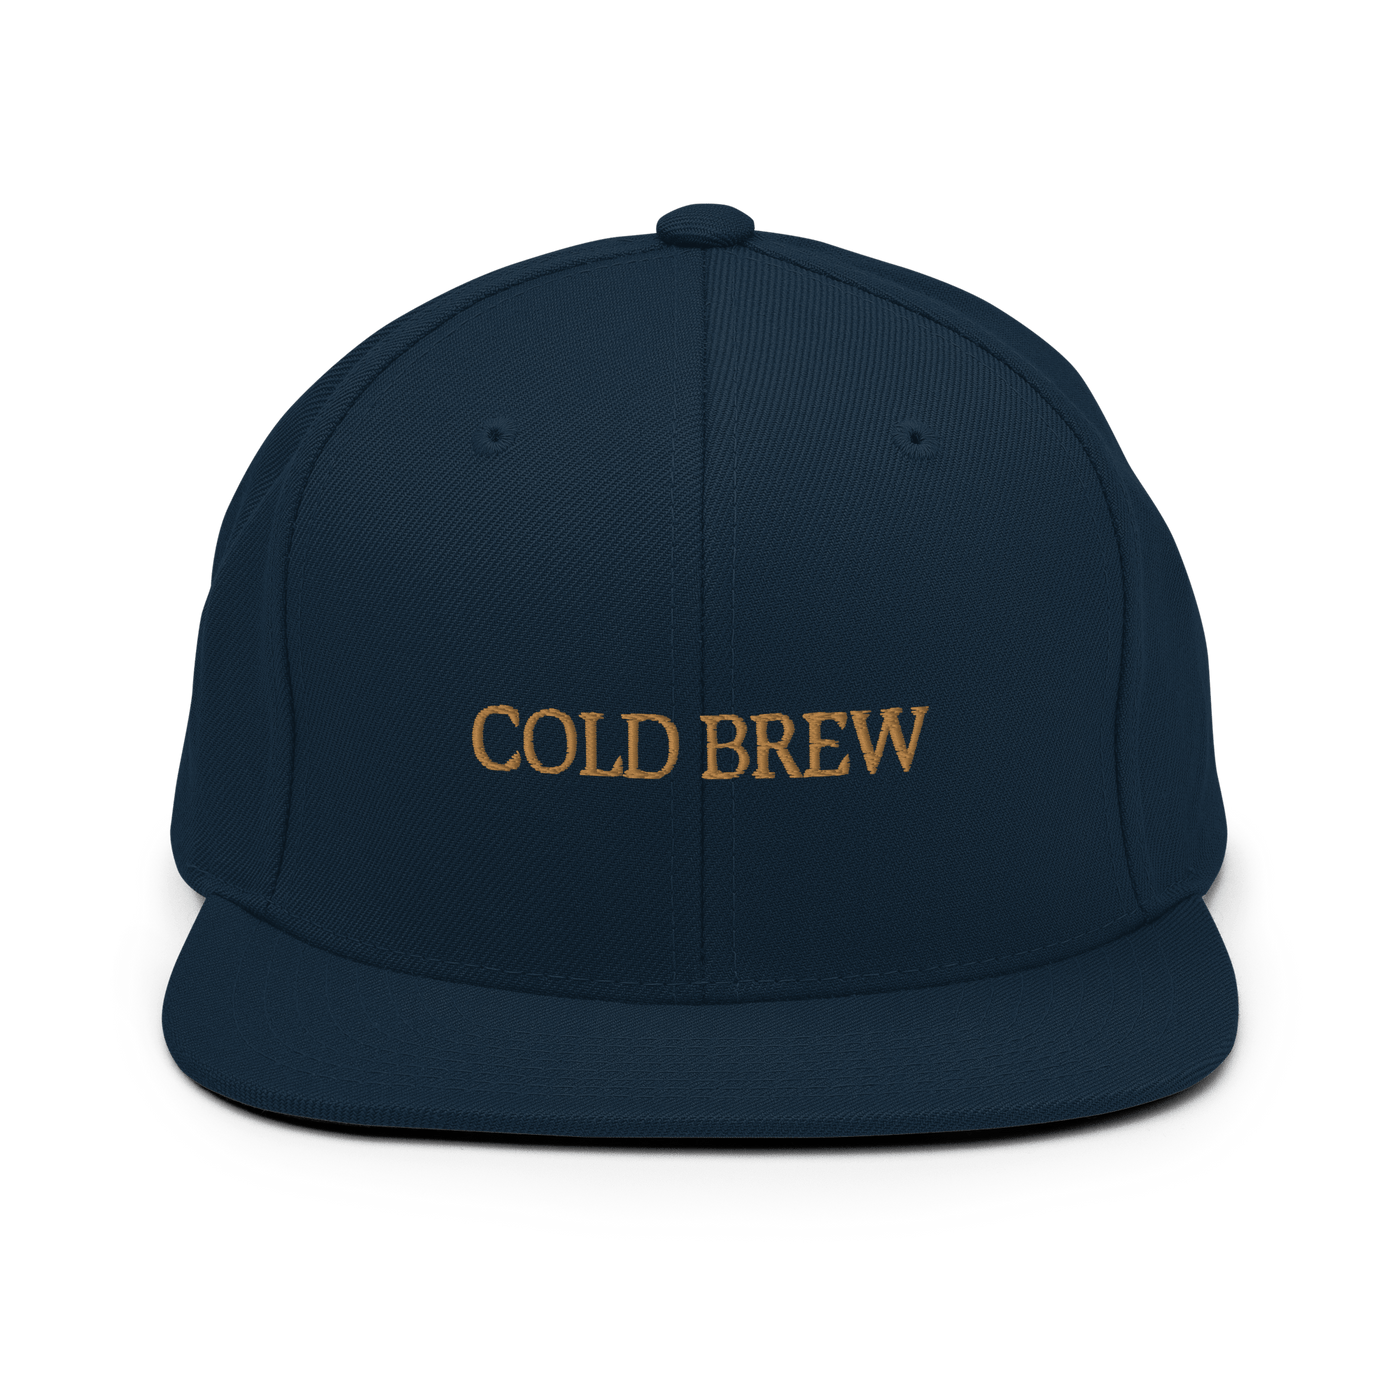 Cold Brew Snapback Hat - Dark Navy - - Just Another Cap Store